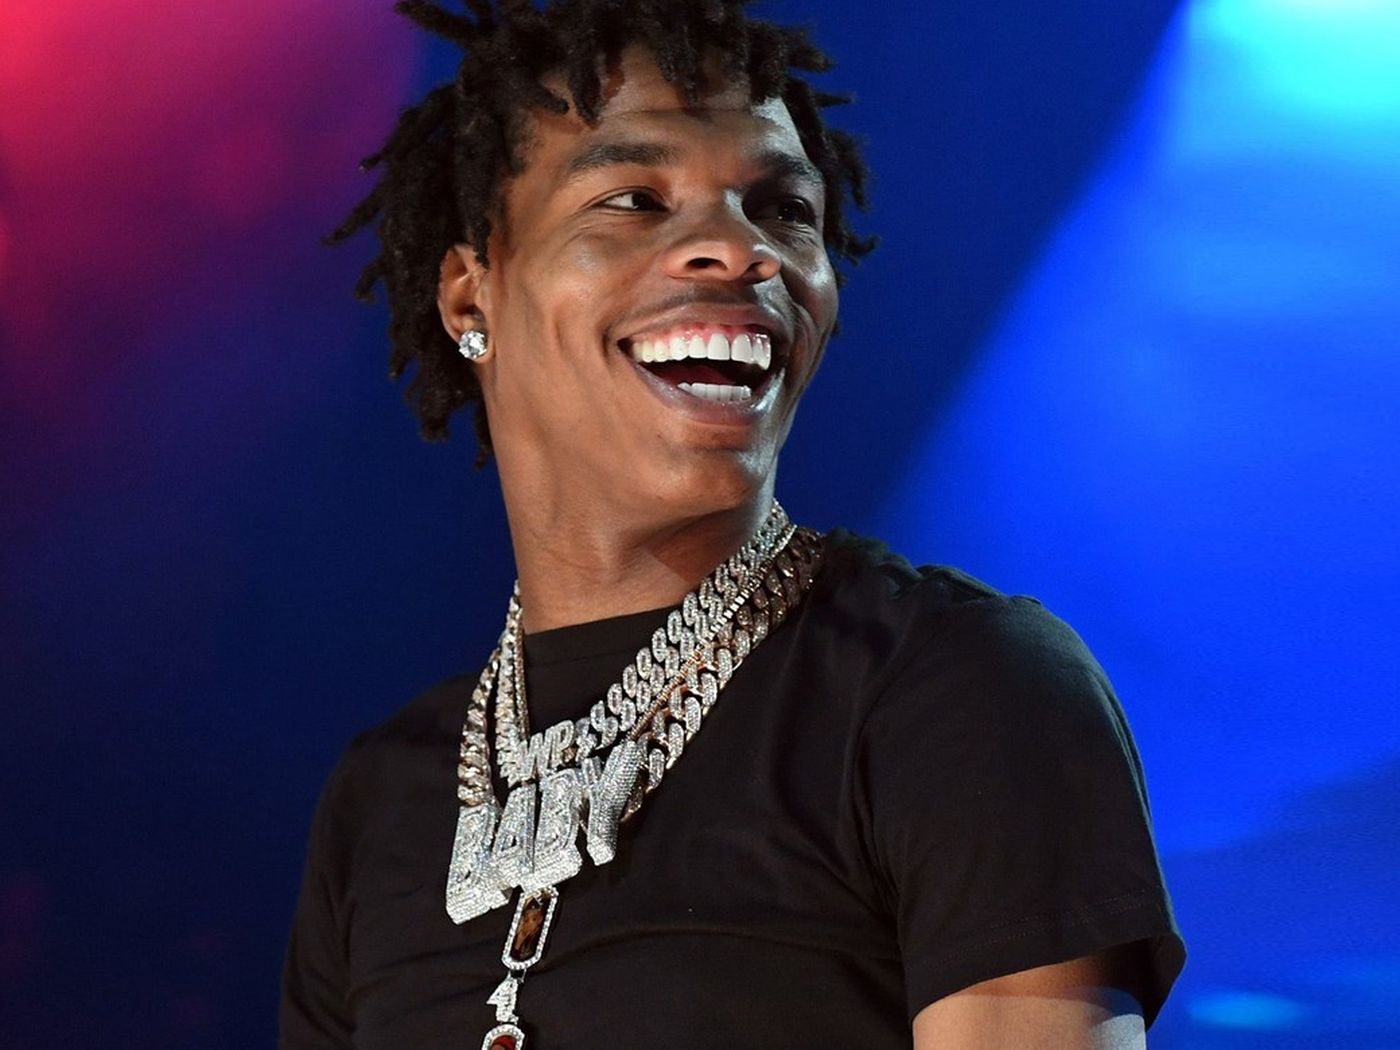 Lil Baby becomes the first artist to go double platinum in 2020.